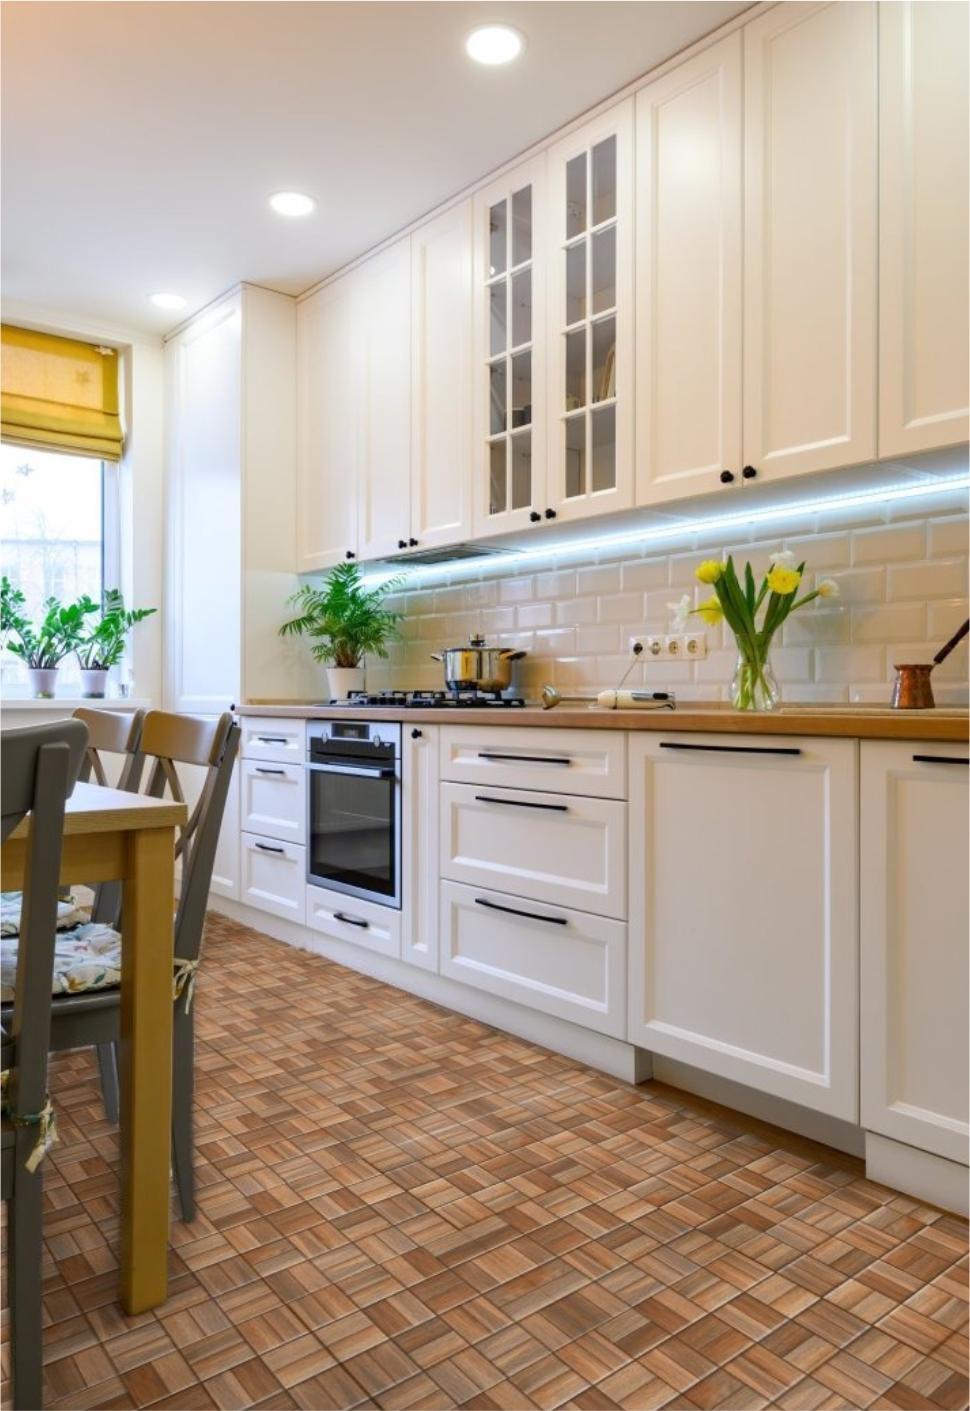 How To Choose Tiles For a Small Kitchen?